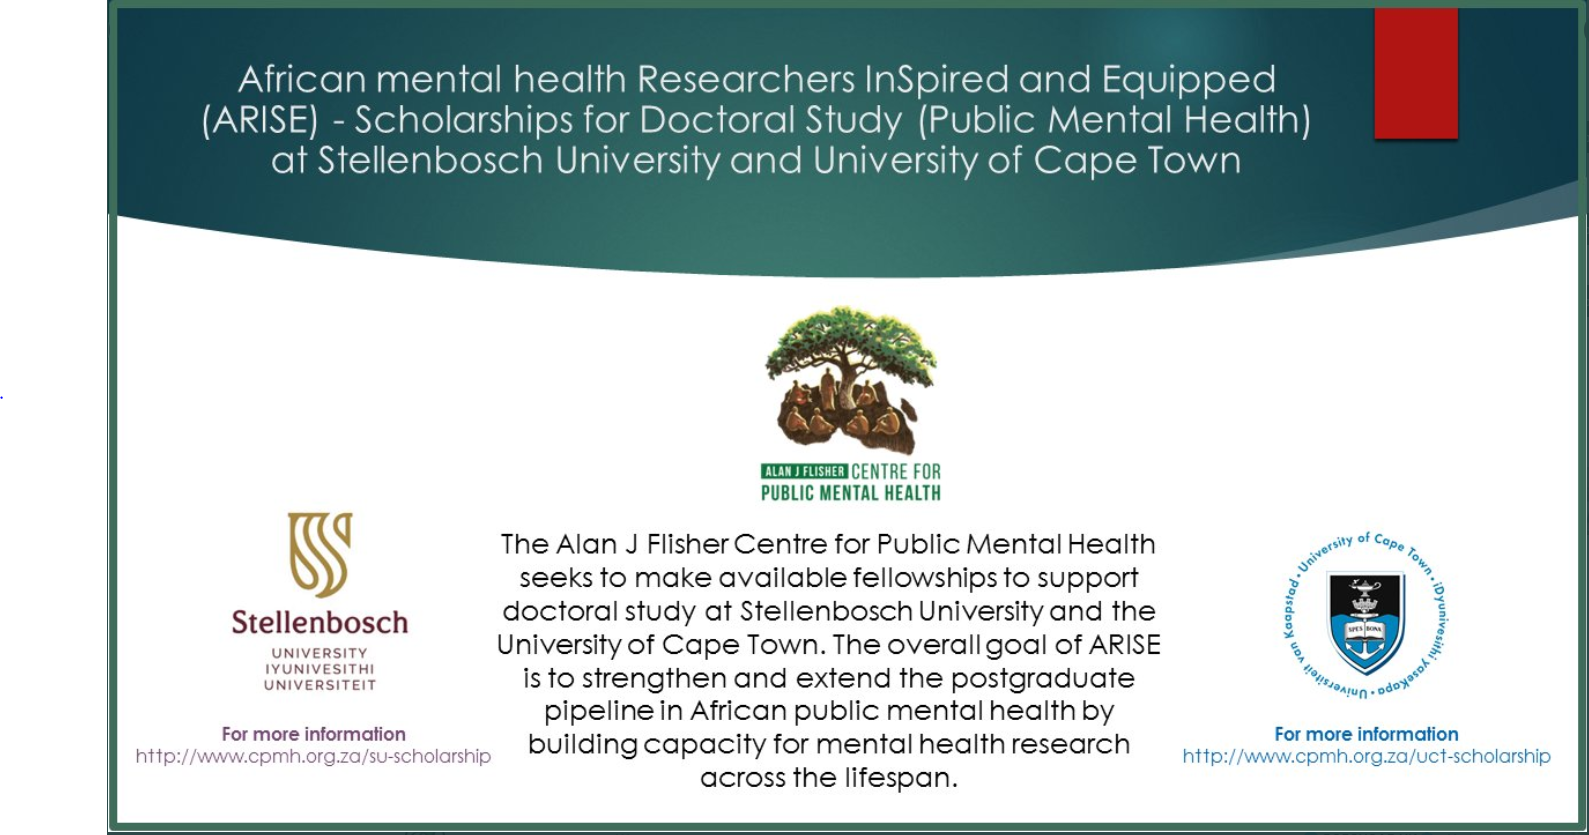 African mental health Researchers InSpired and Equipped (ARISE) – Scholarships for Doctoral Study (Public Mental Health)